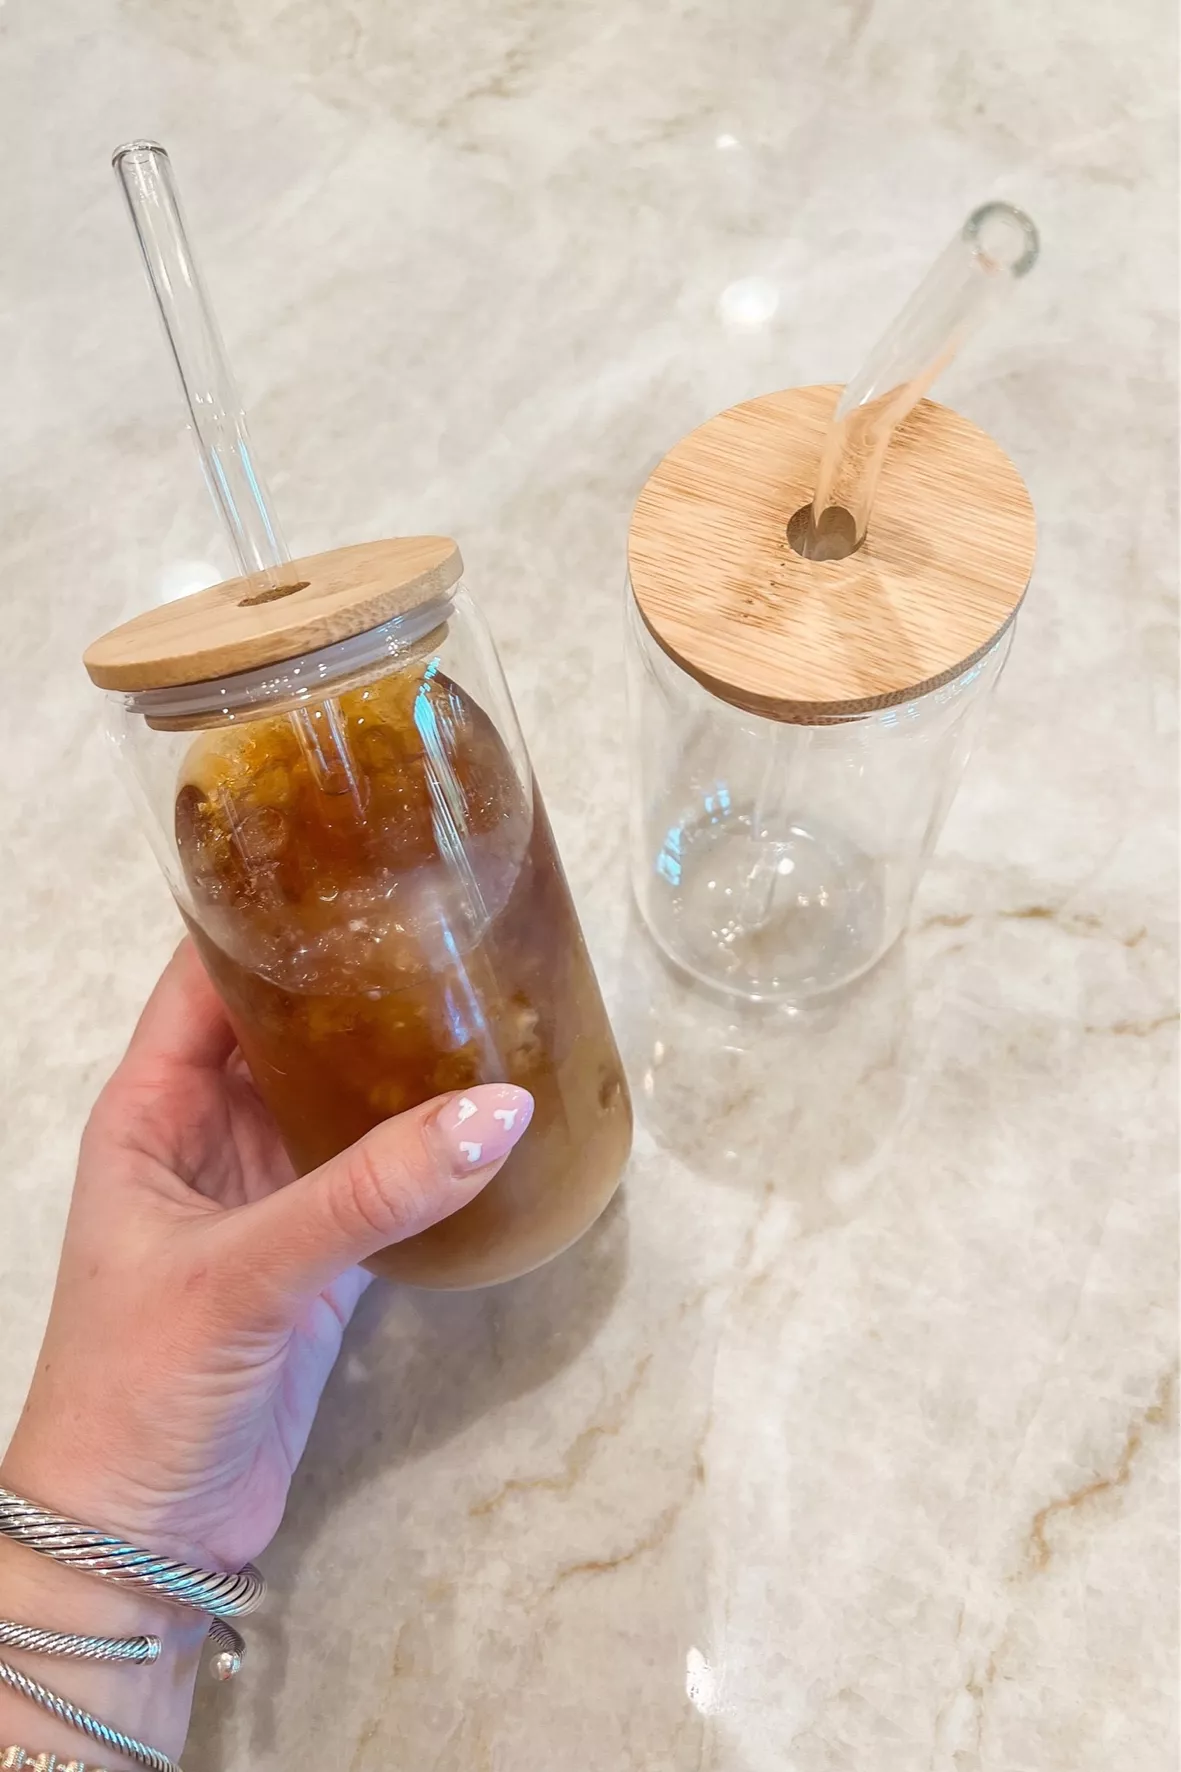  8 Pcs Drinking Glasses with Bamboo Lids and Glass